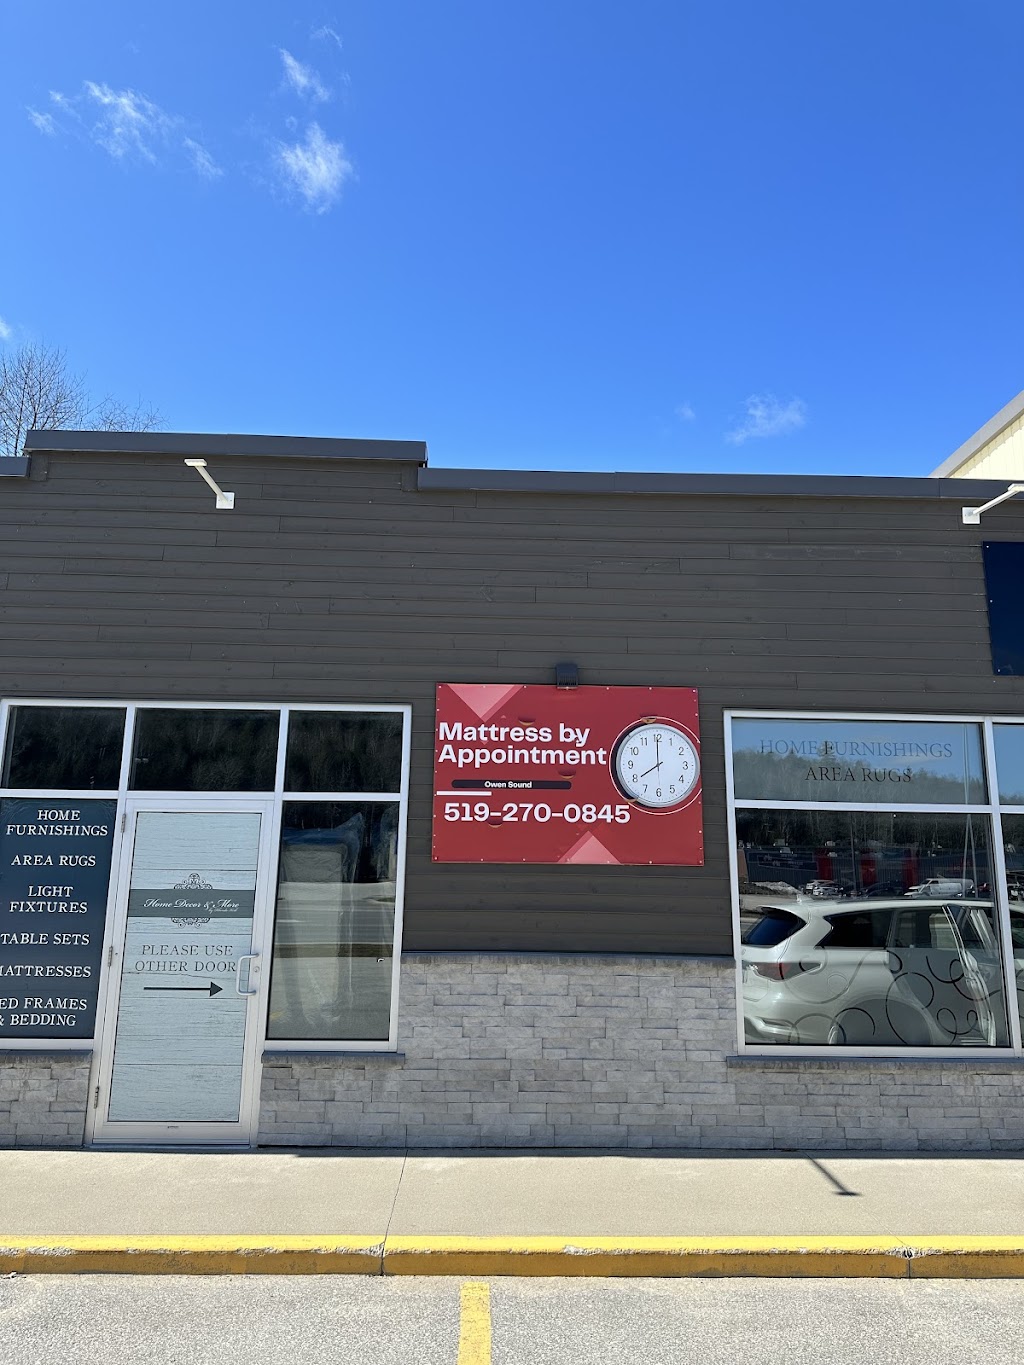 Mattress By Appointment - Owen Sound | furniture store | 1000 10th St W, Owen Sound, ON N4K 5S2, Canada | 5192700845 OR +1 519-270-0845